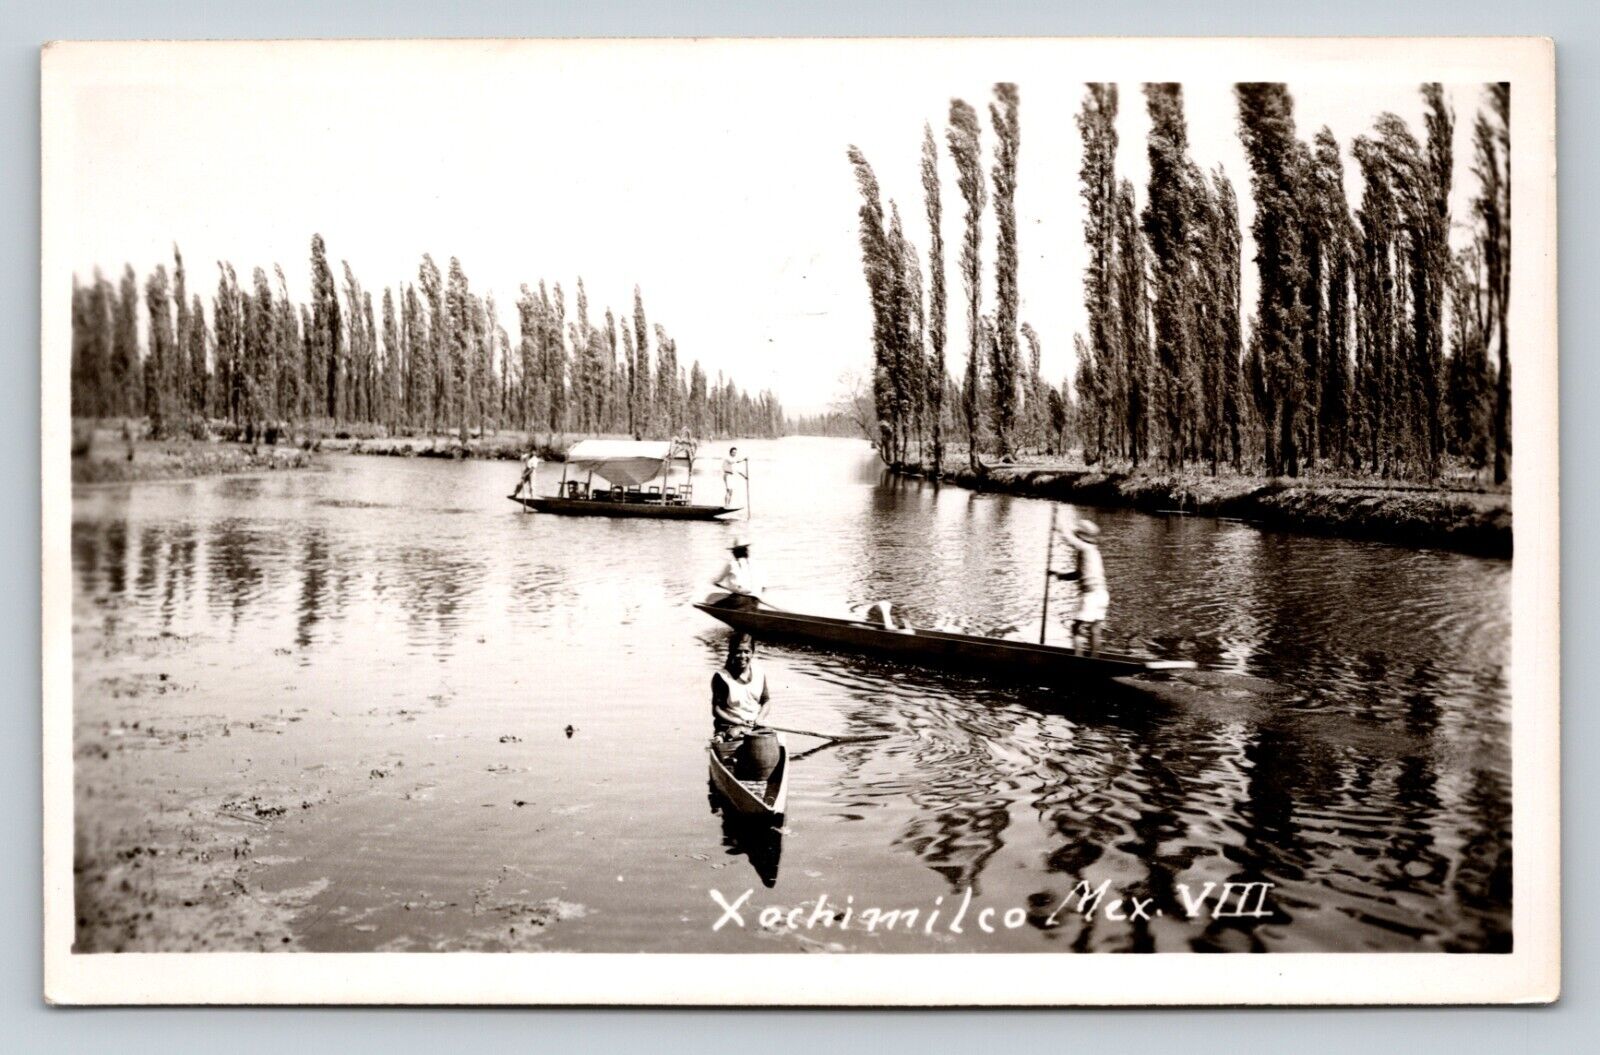 Solitary Boats on the Tranquil Canals of Xochimilco Mexico VINTAGE RPPC Postcard